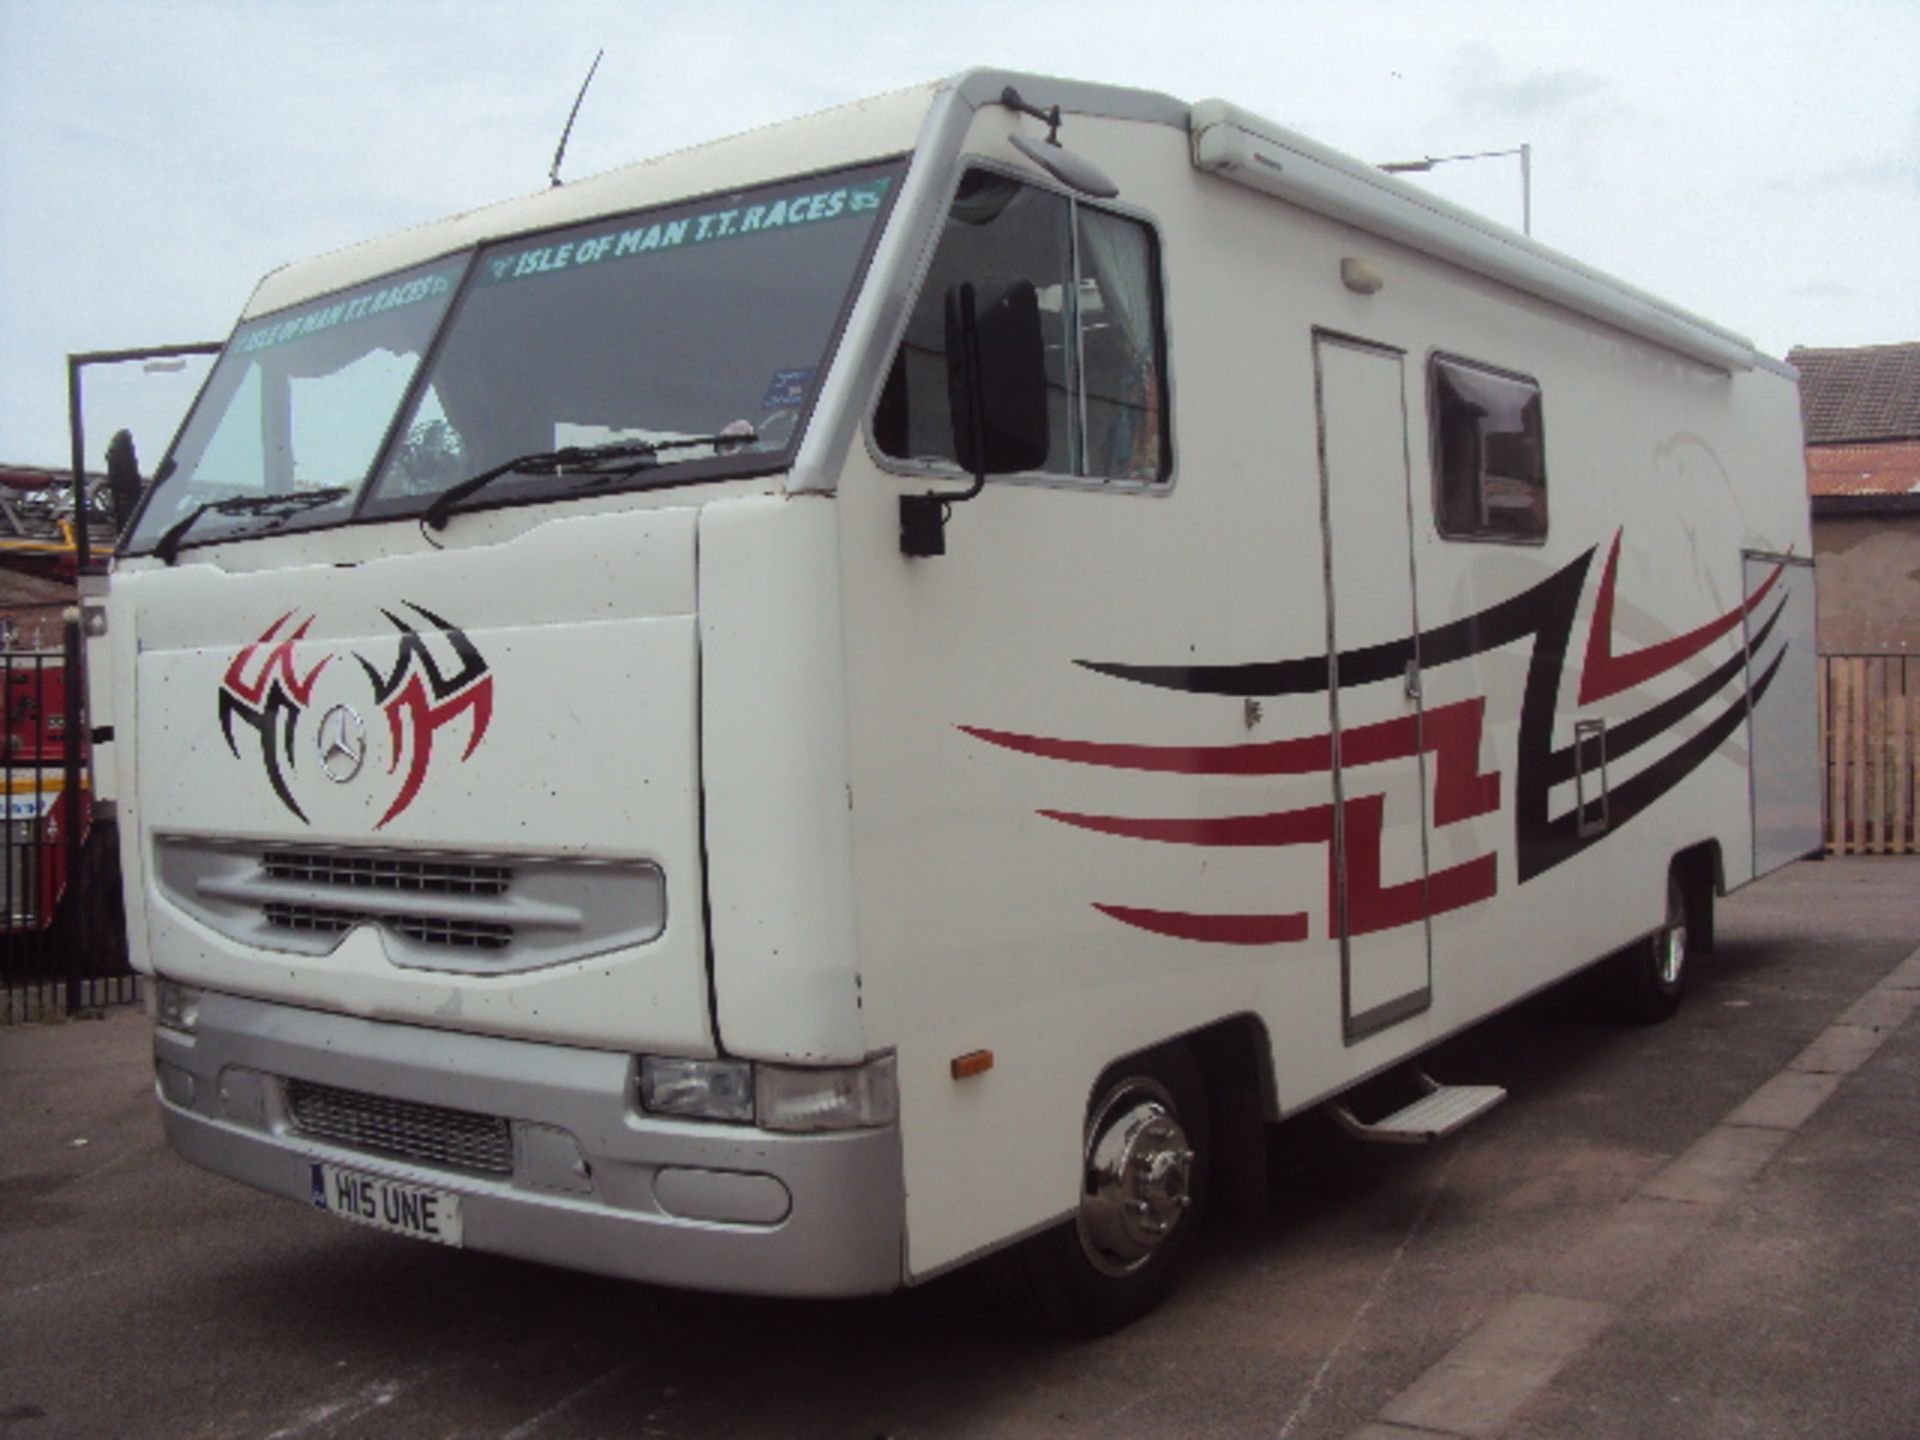 1991 MERCEDES 814 7.5t coach built motor home. (187,000 recorded kms), Reg: H15 UNE (TESTED to